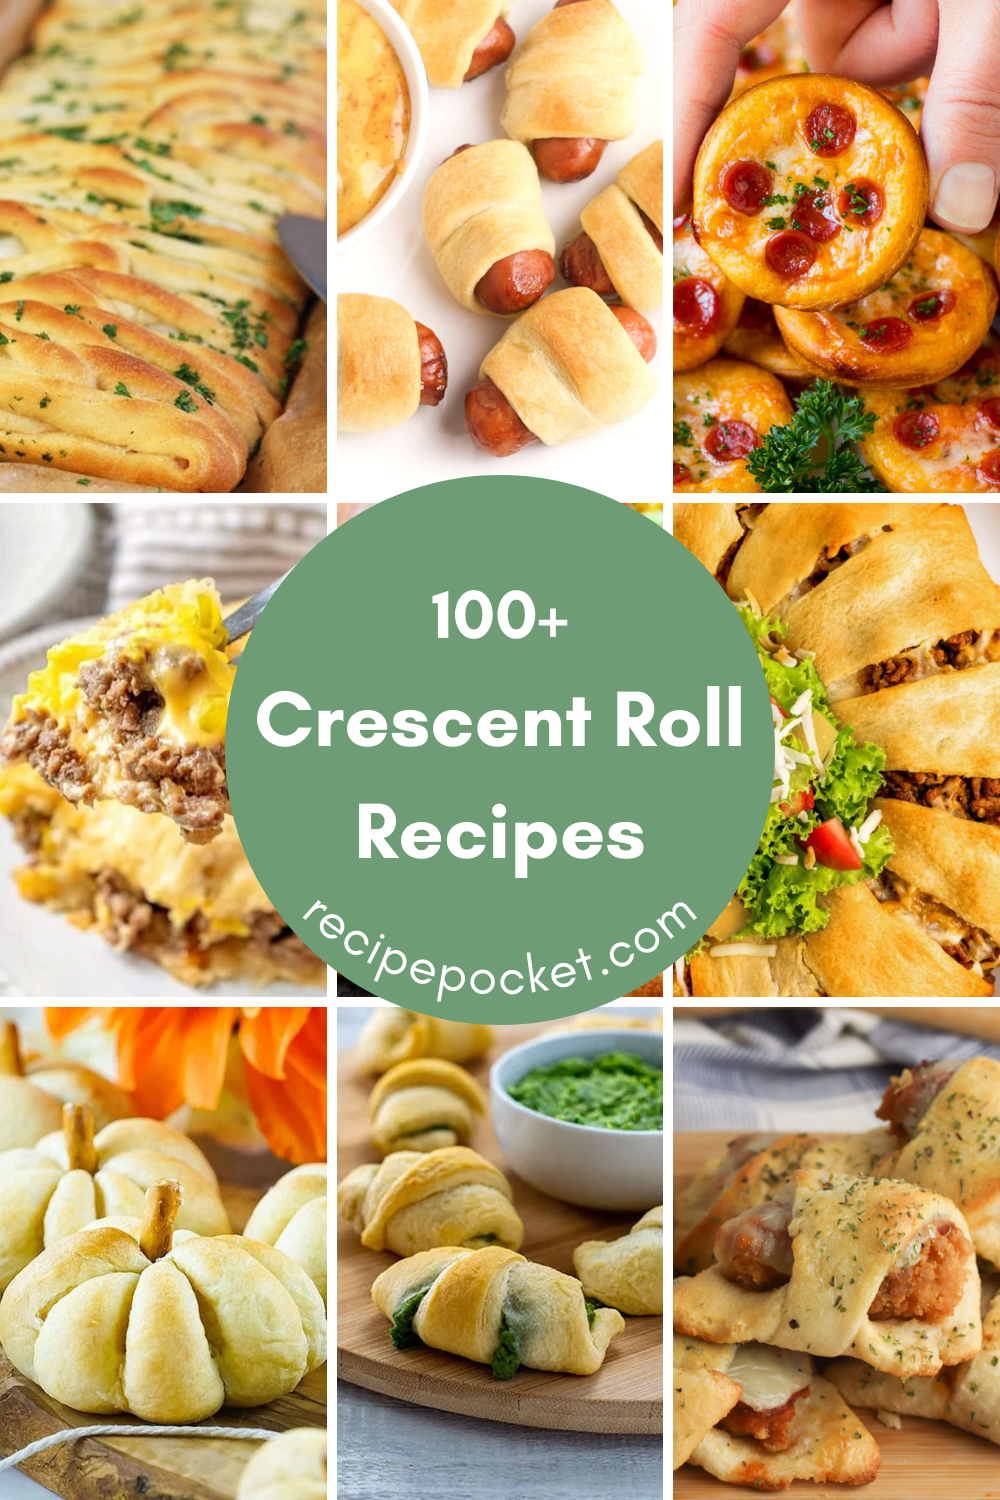 Hero image for recipe round-up on crescent roll recipes.